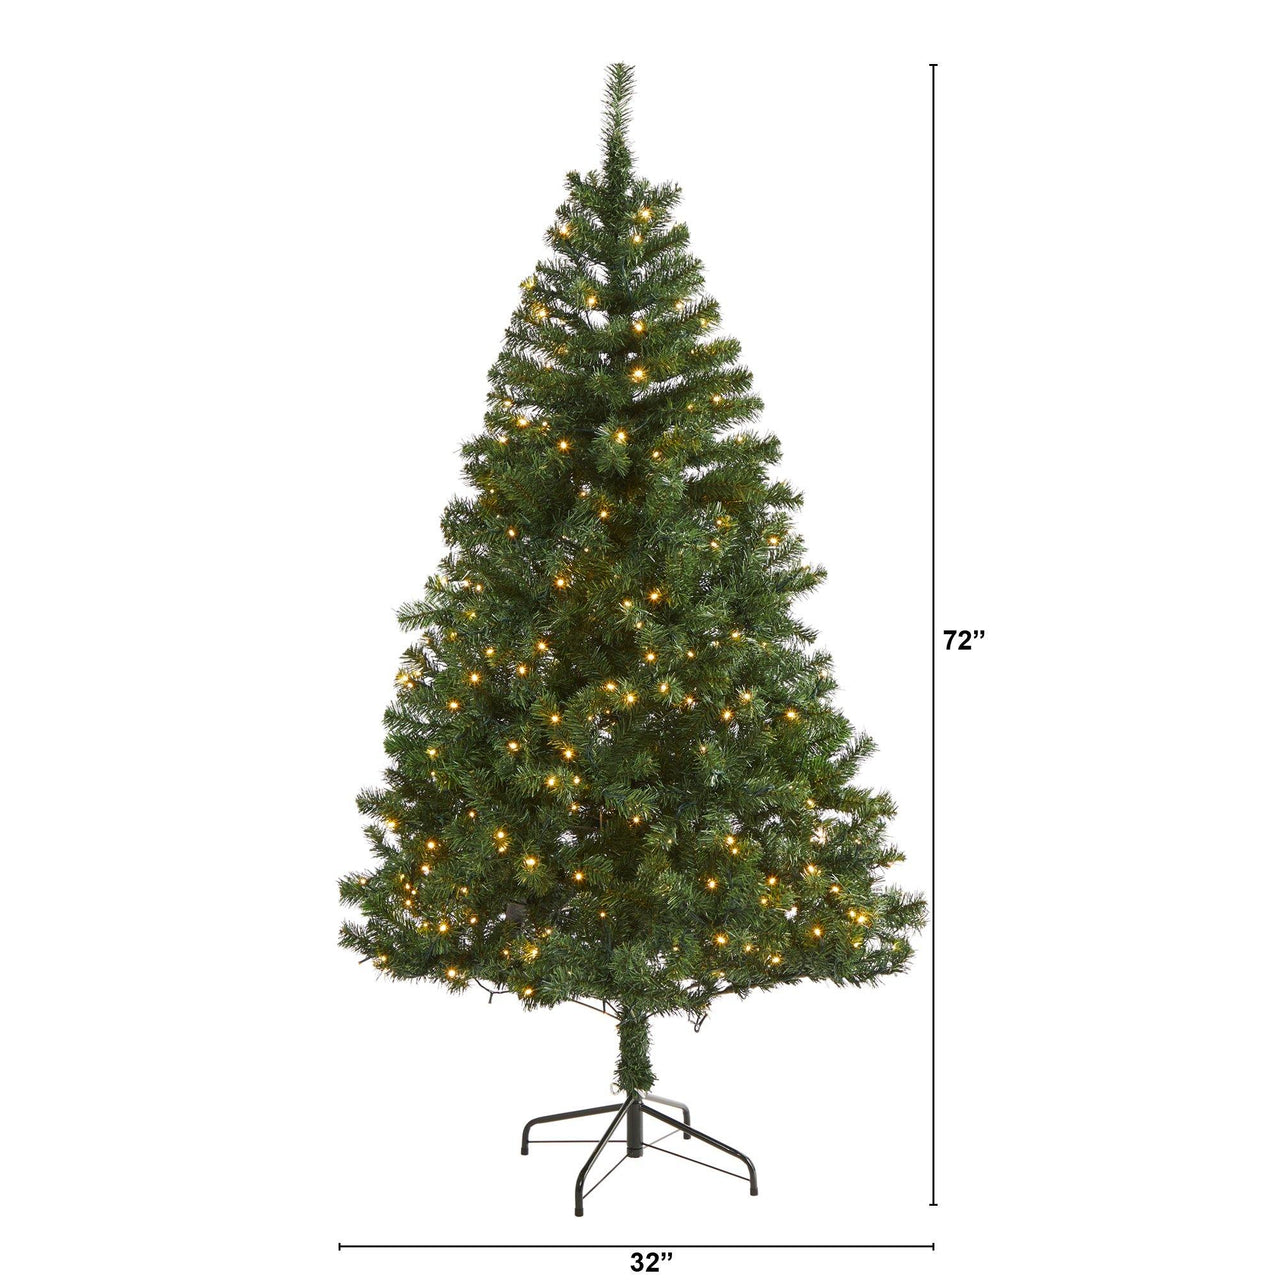 6' Northern Tip Pine Artificial Christmas Tree with 250 Clear LED Lights - The Fox Decor